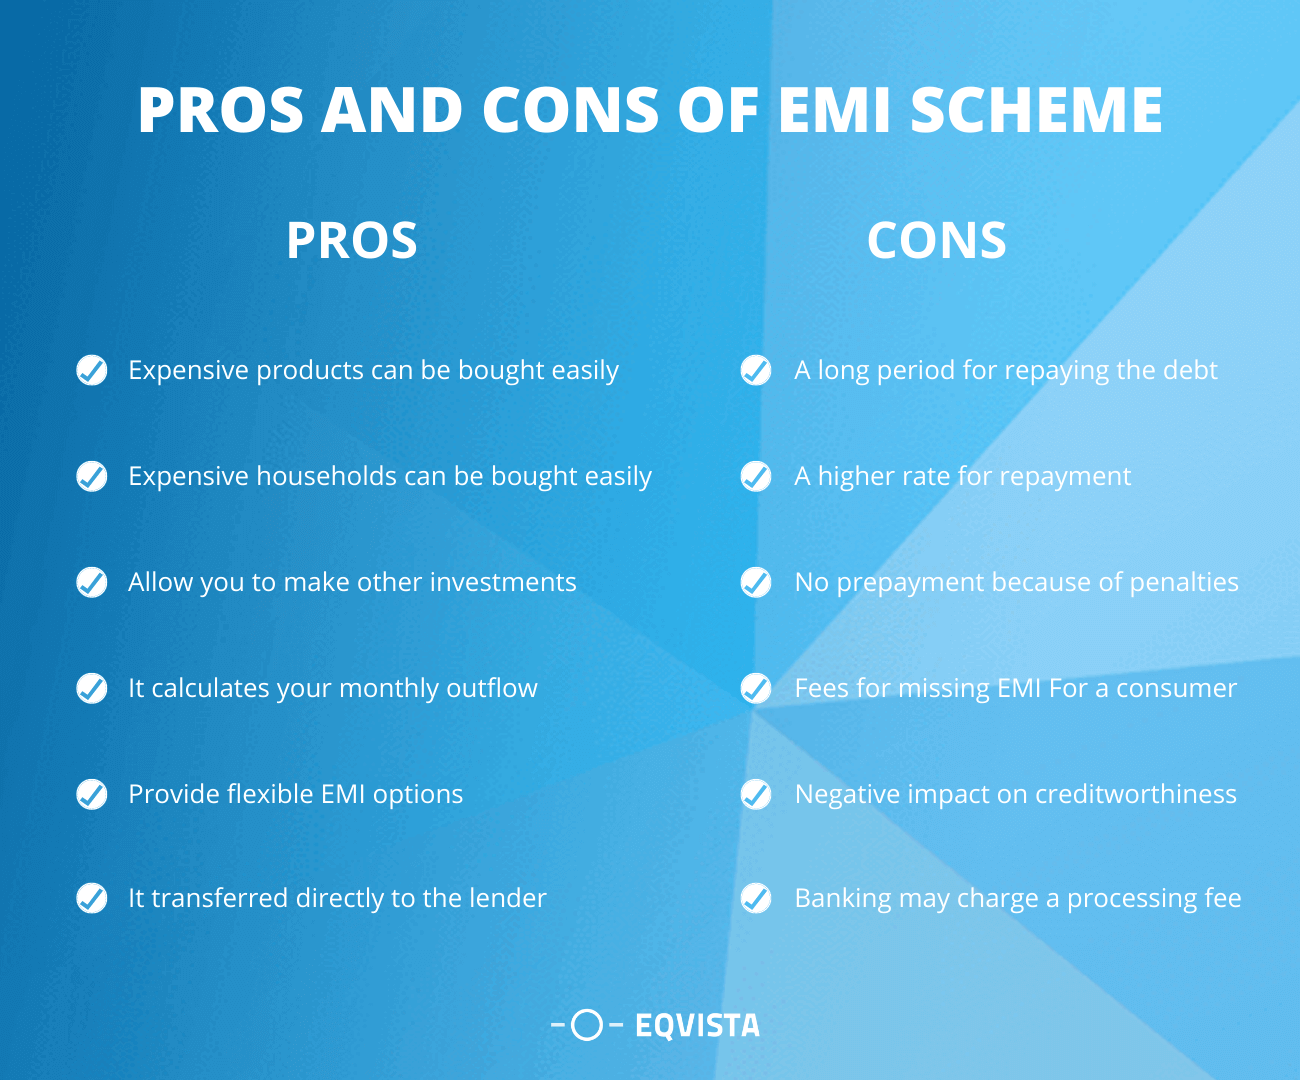 Pros and Cons of EMI scheme